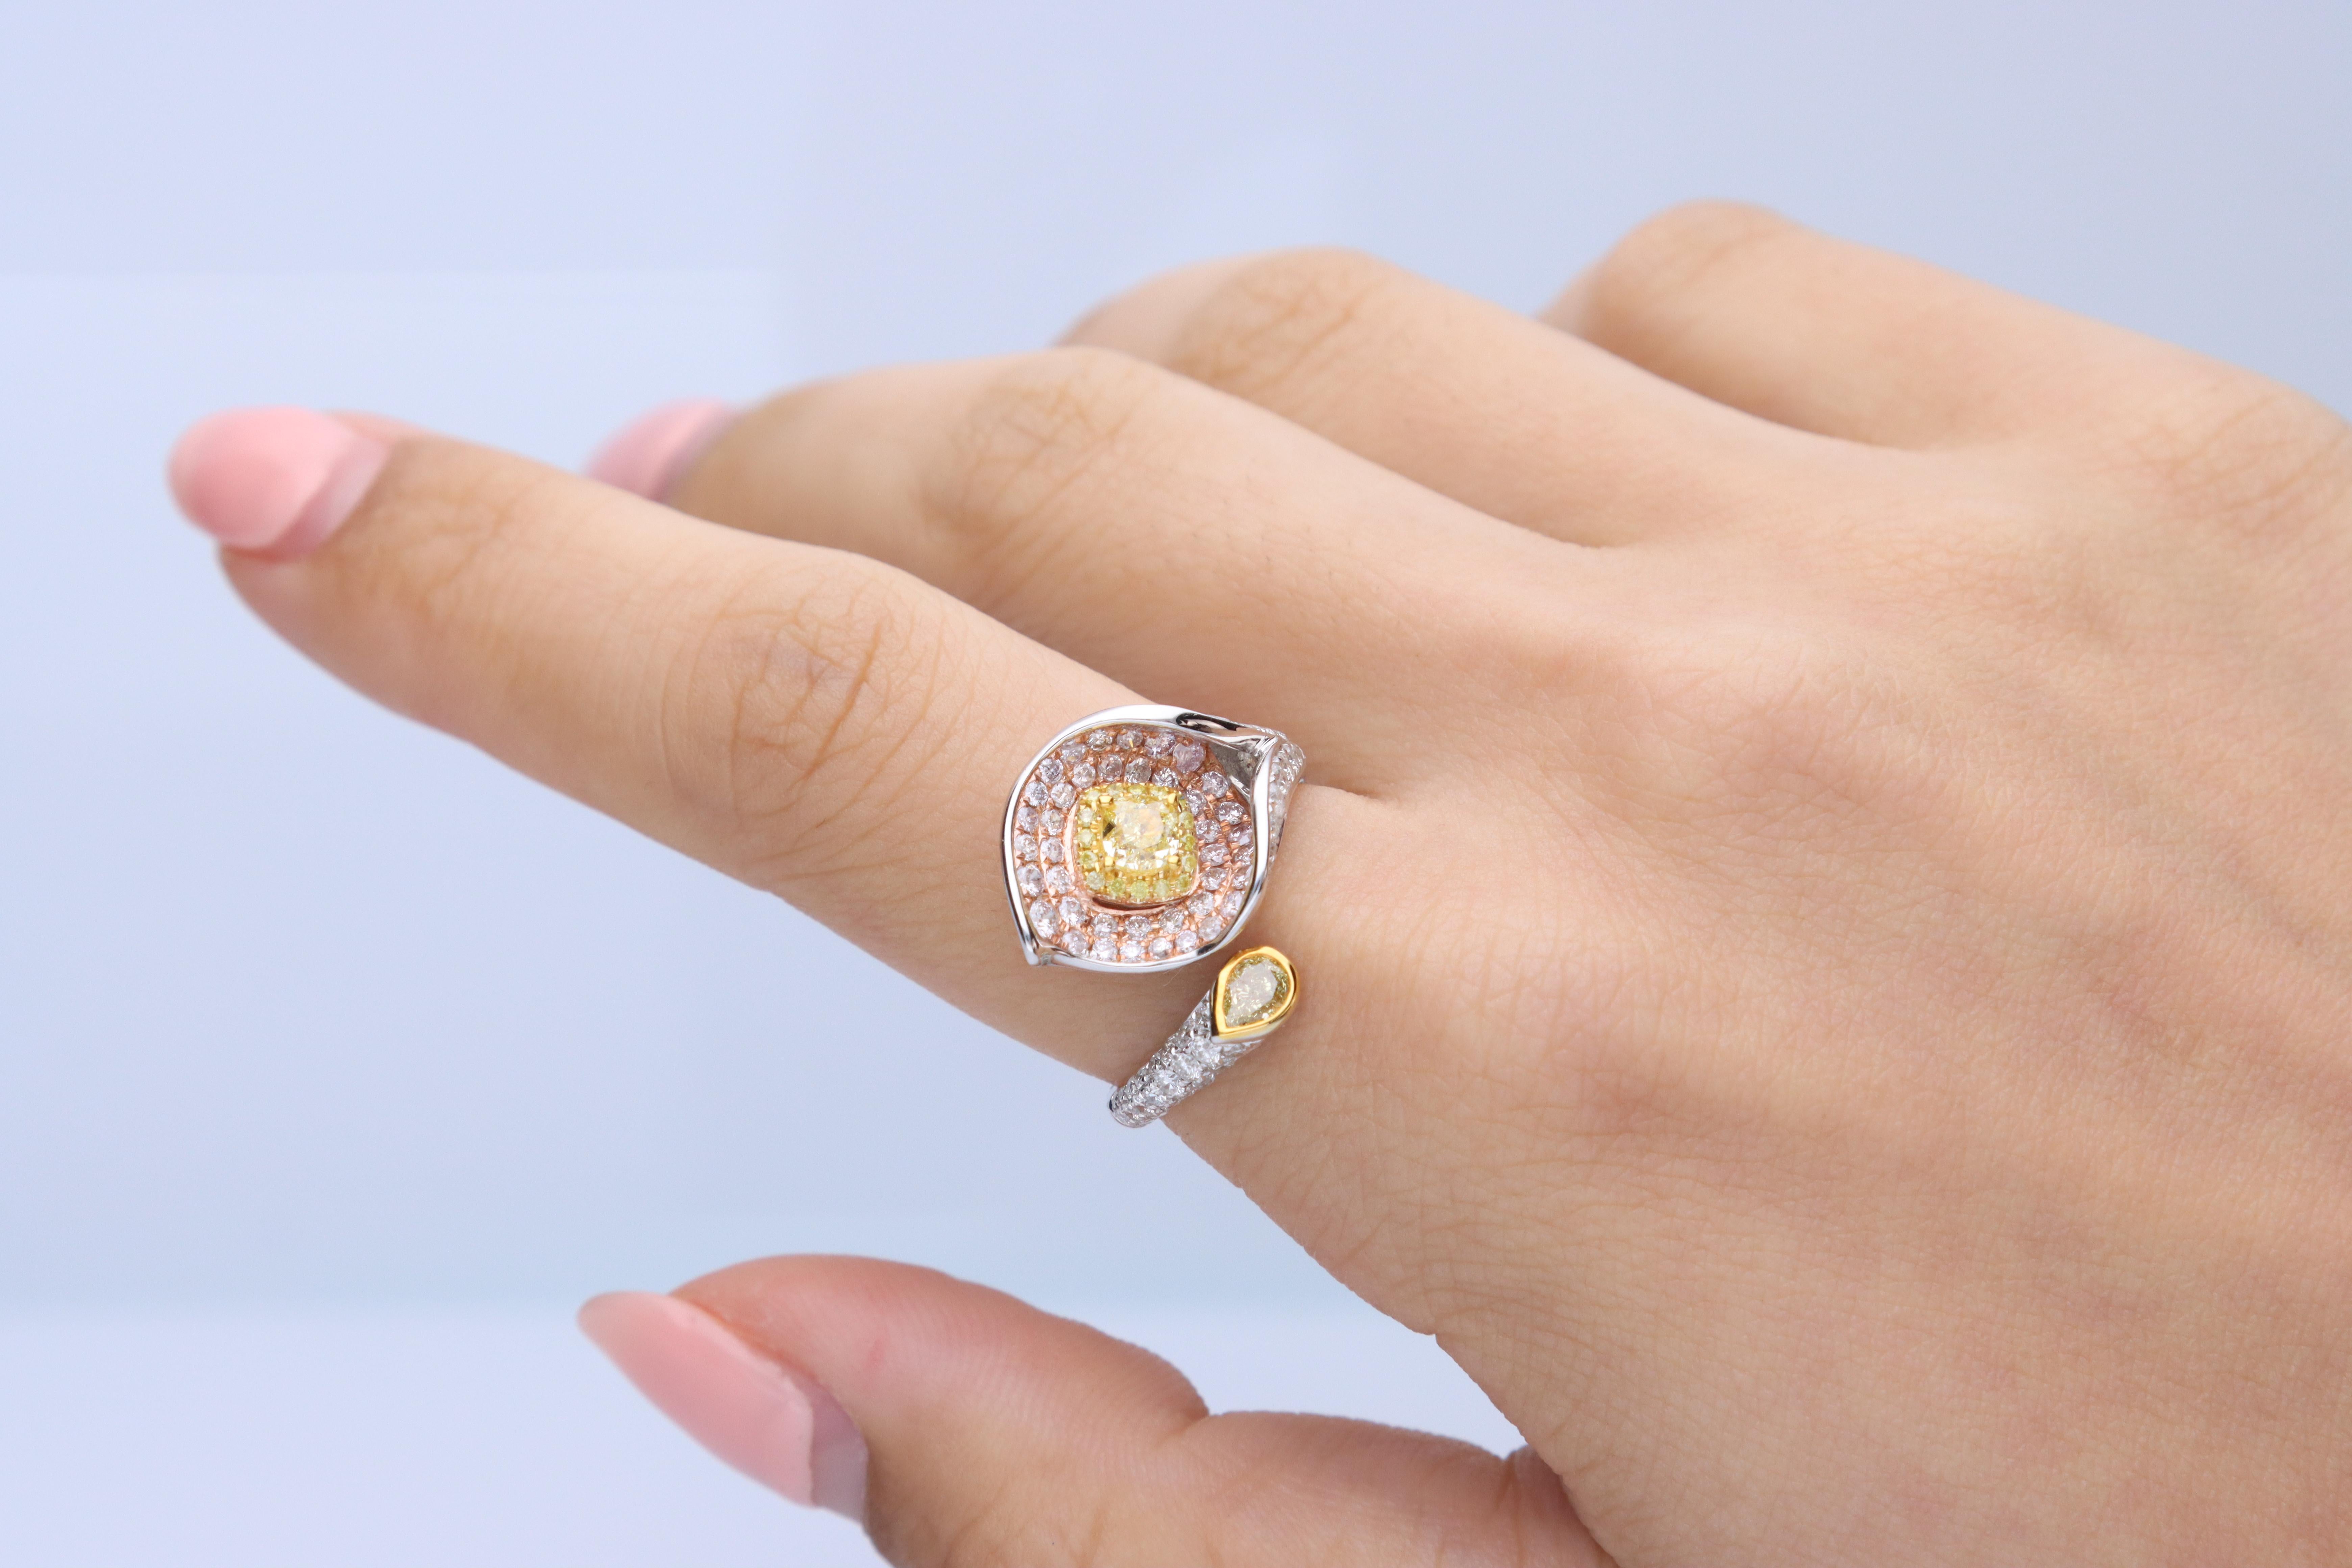 Stunning, timeless and classy eternity Unique Ring. Decorate yourself in luxury with this Gin & Grace Ring. The 14K Three Tone Gold jewelry boasts with Cushion, Pear-cut (2 Pcs) 0.60 carat Yellow Diamond and Natural Round-cut white Diamond (38 Pcs)